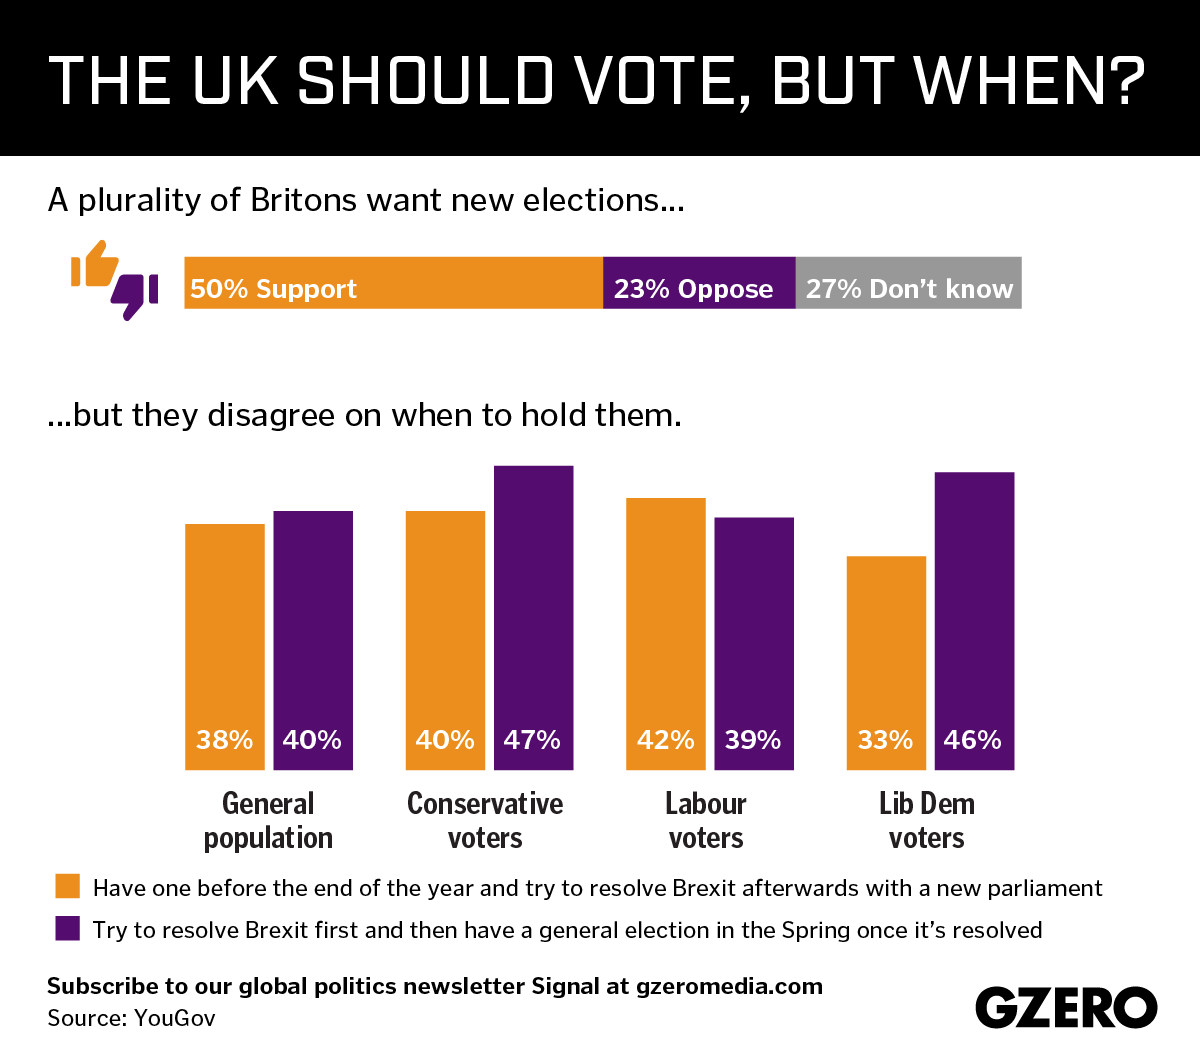 Graphic Truth: The UK should vote, but when?